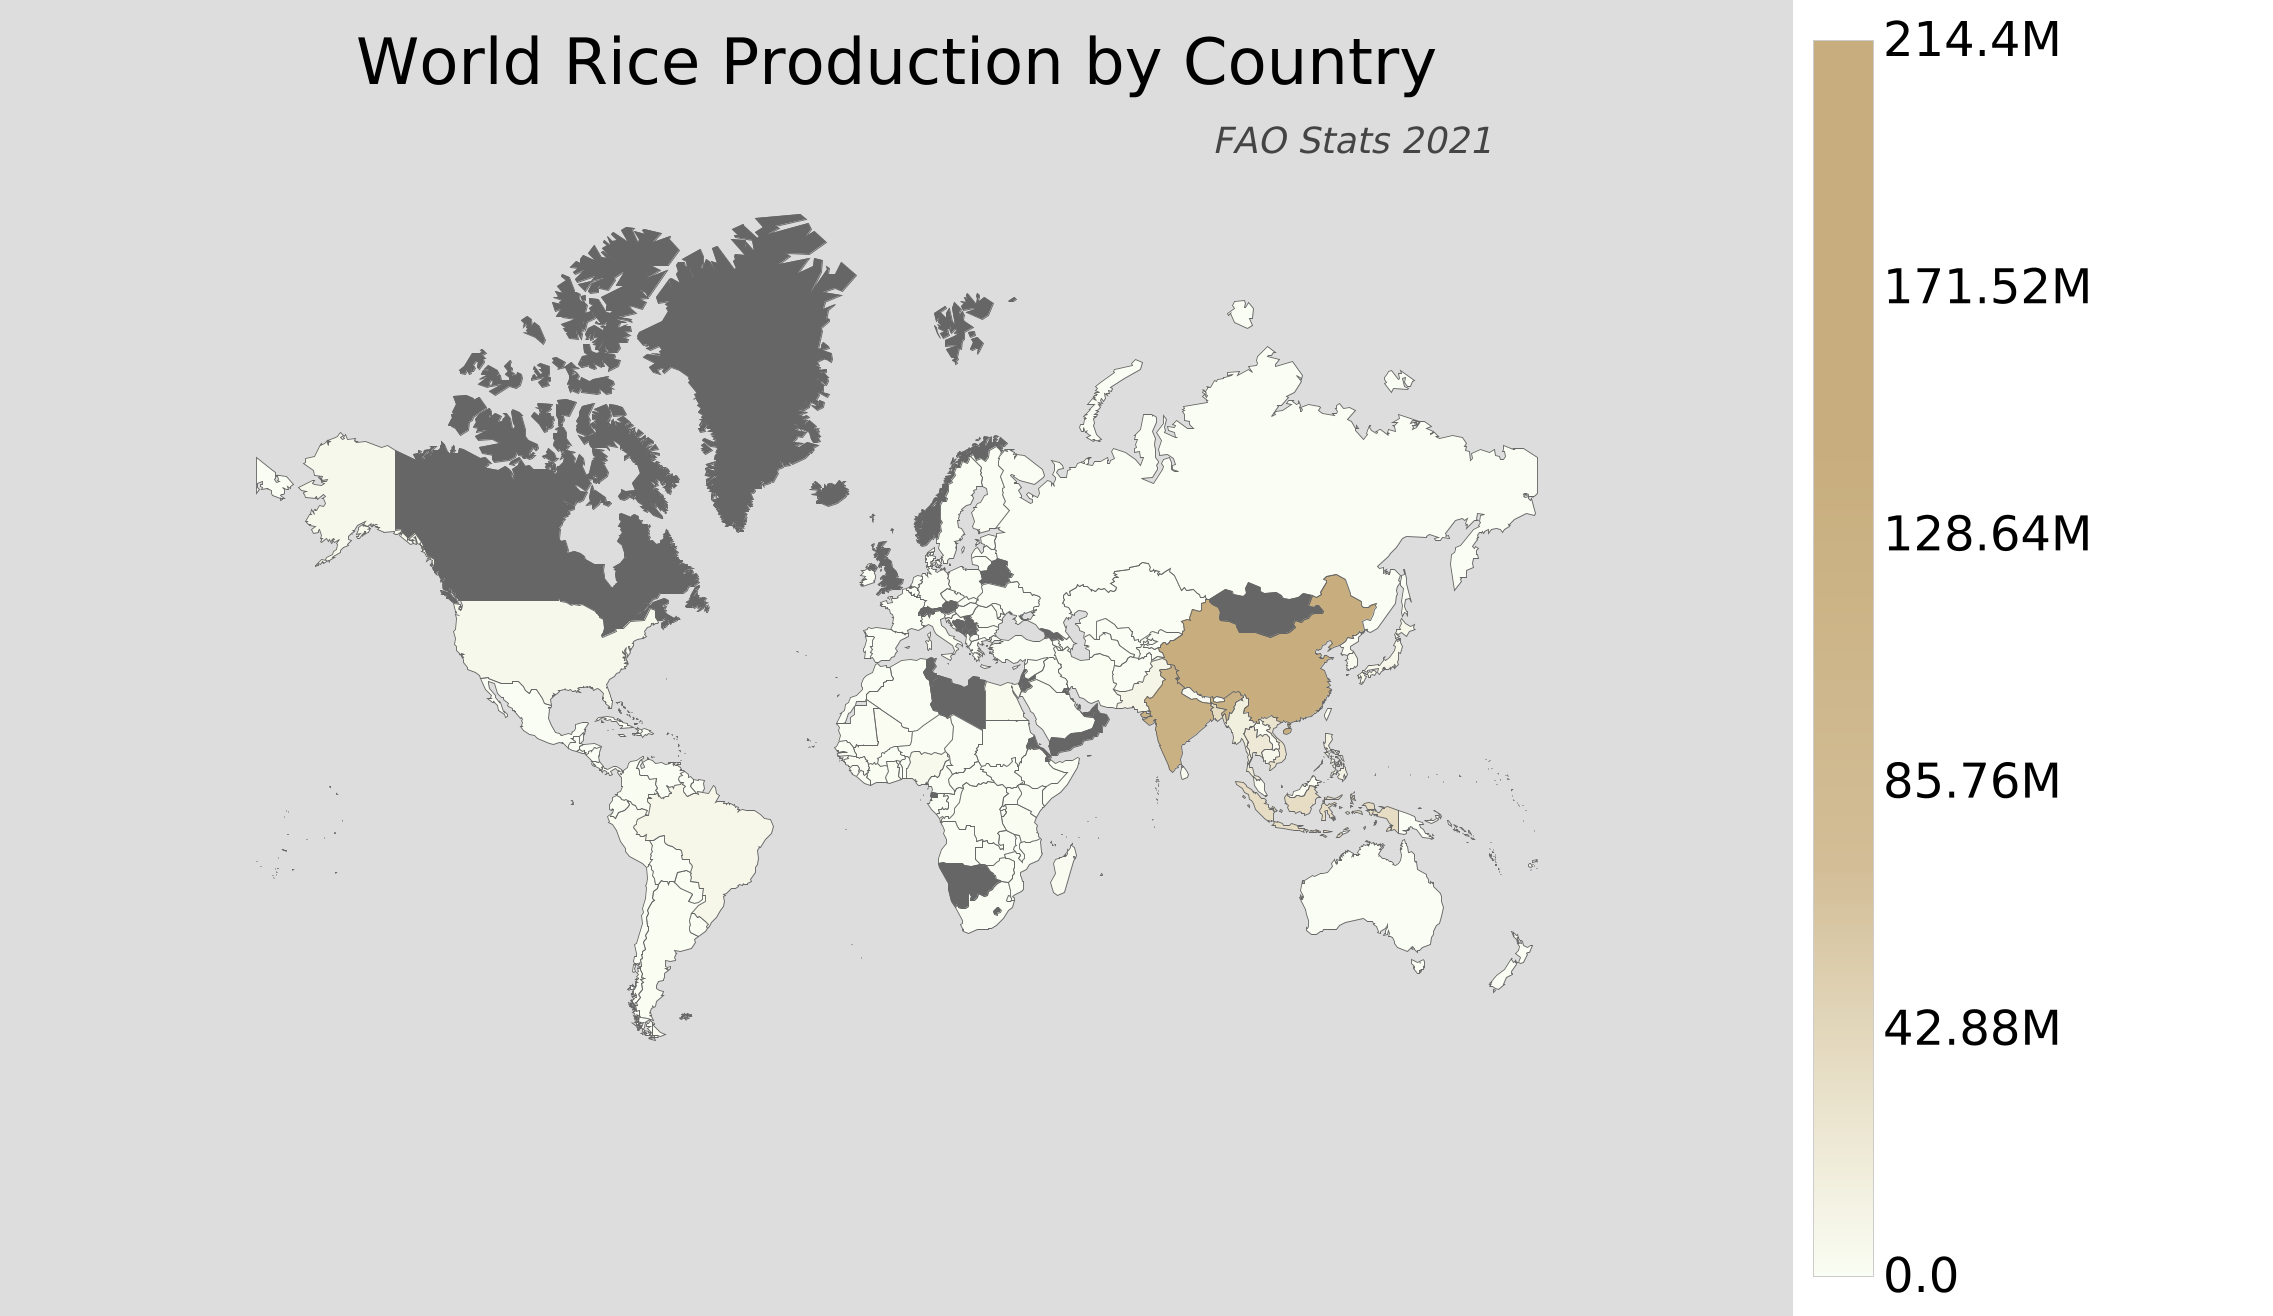 rice exporting countries